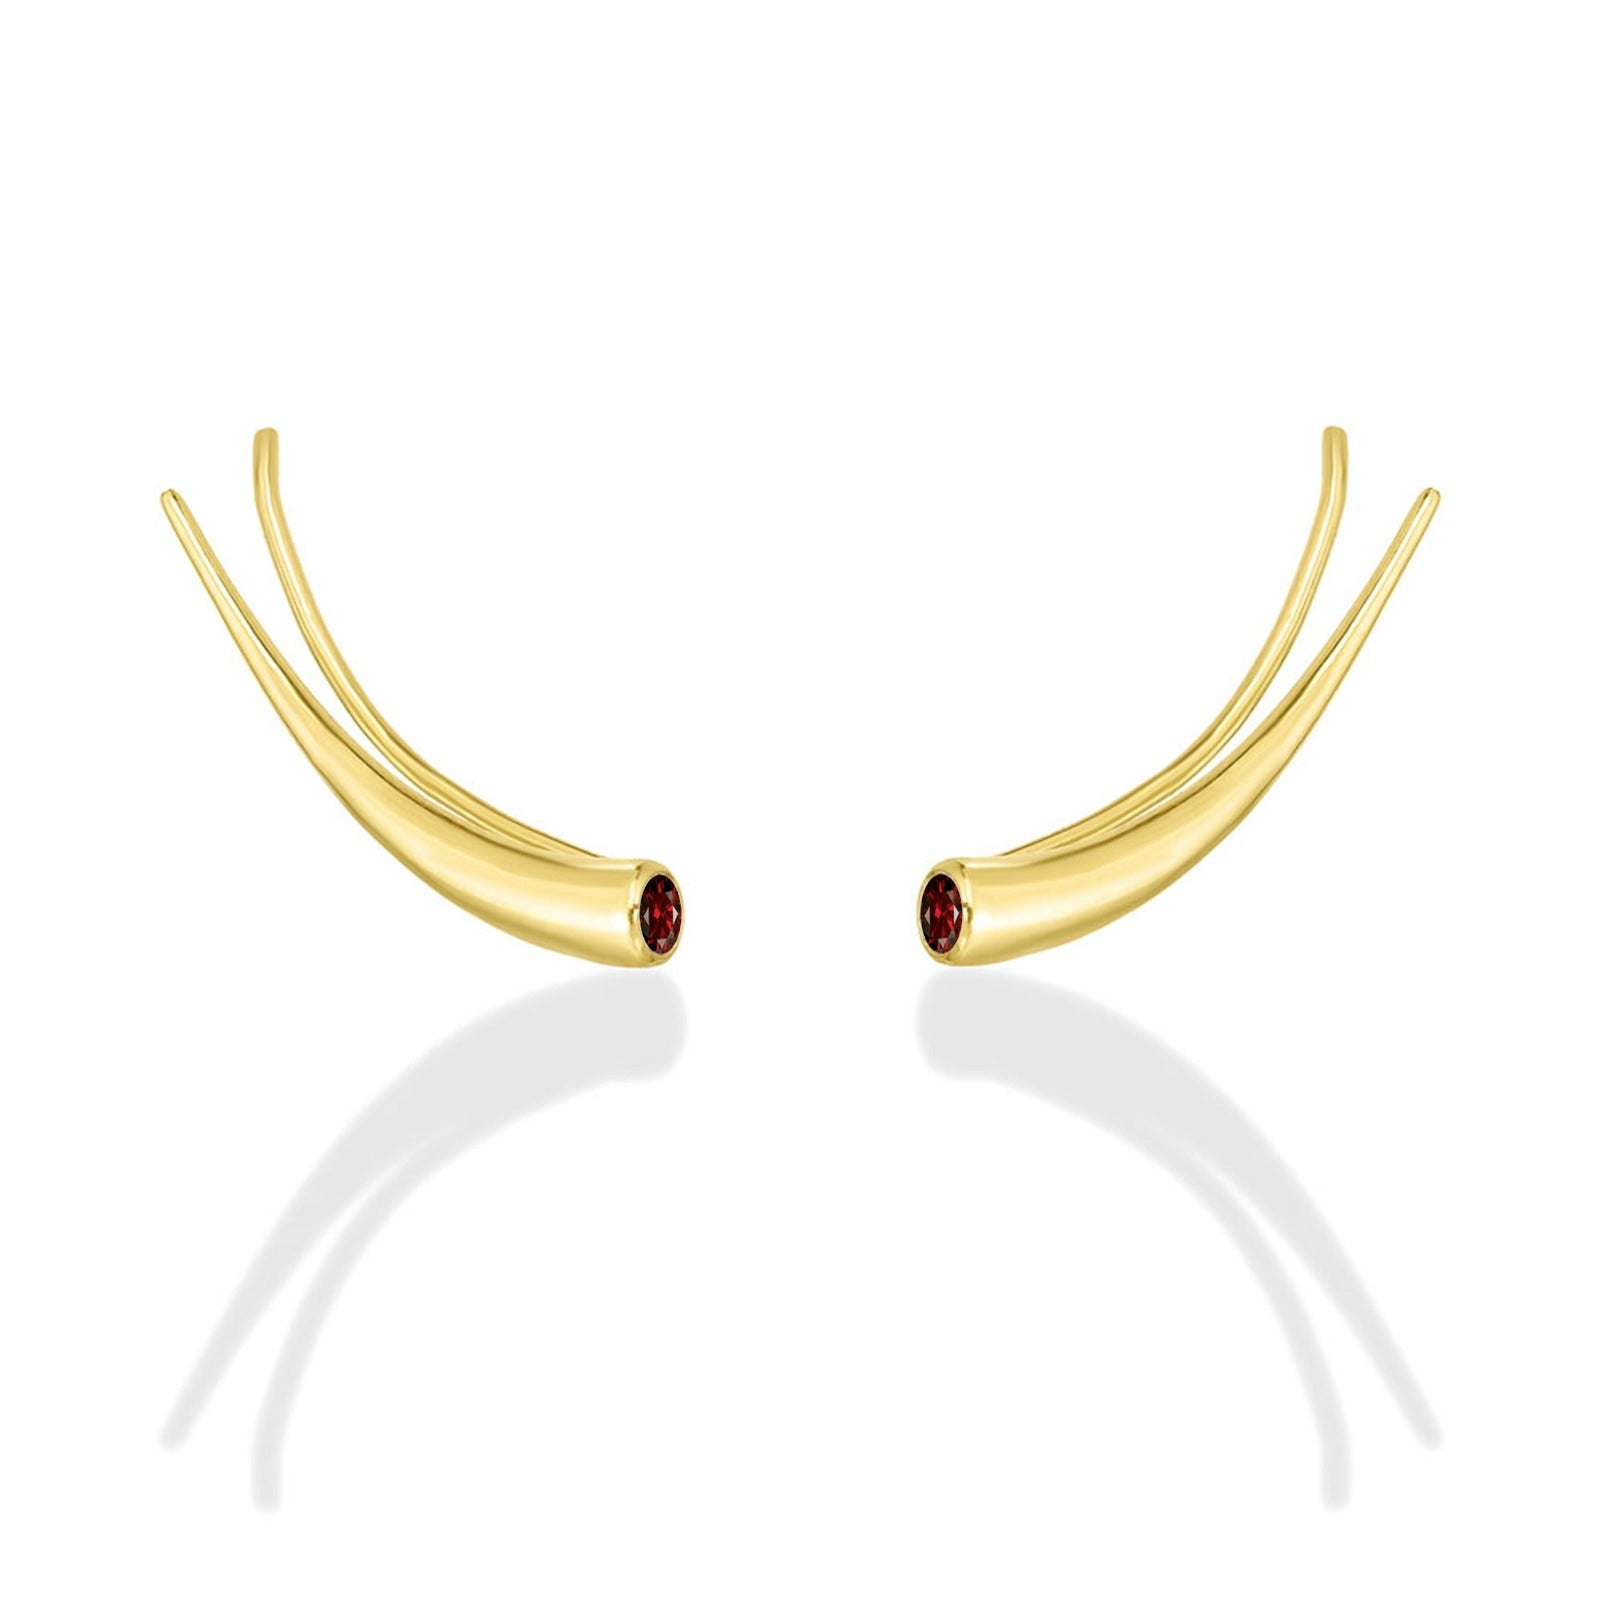 14k gold Curved Quill Climber Earrings with garnet